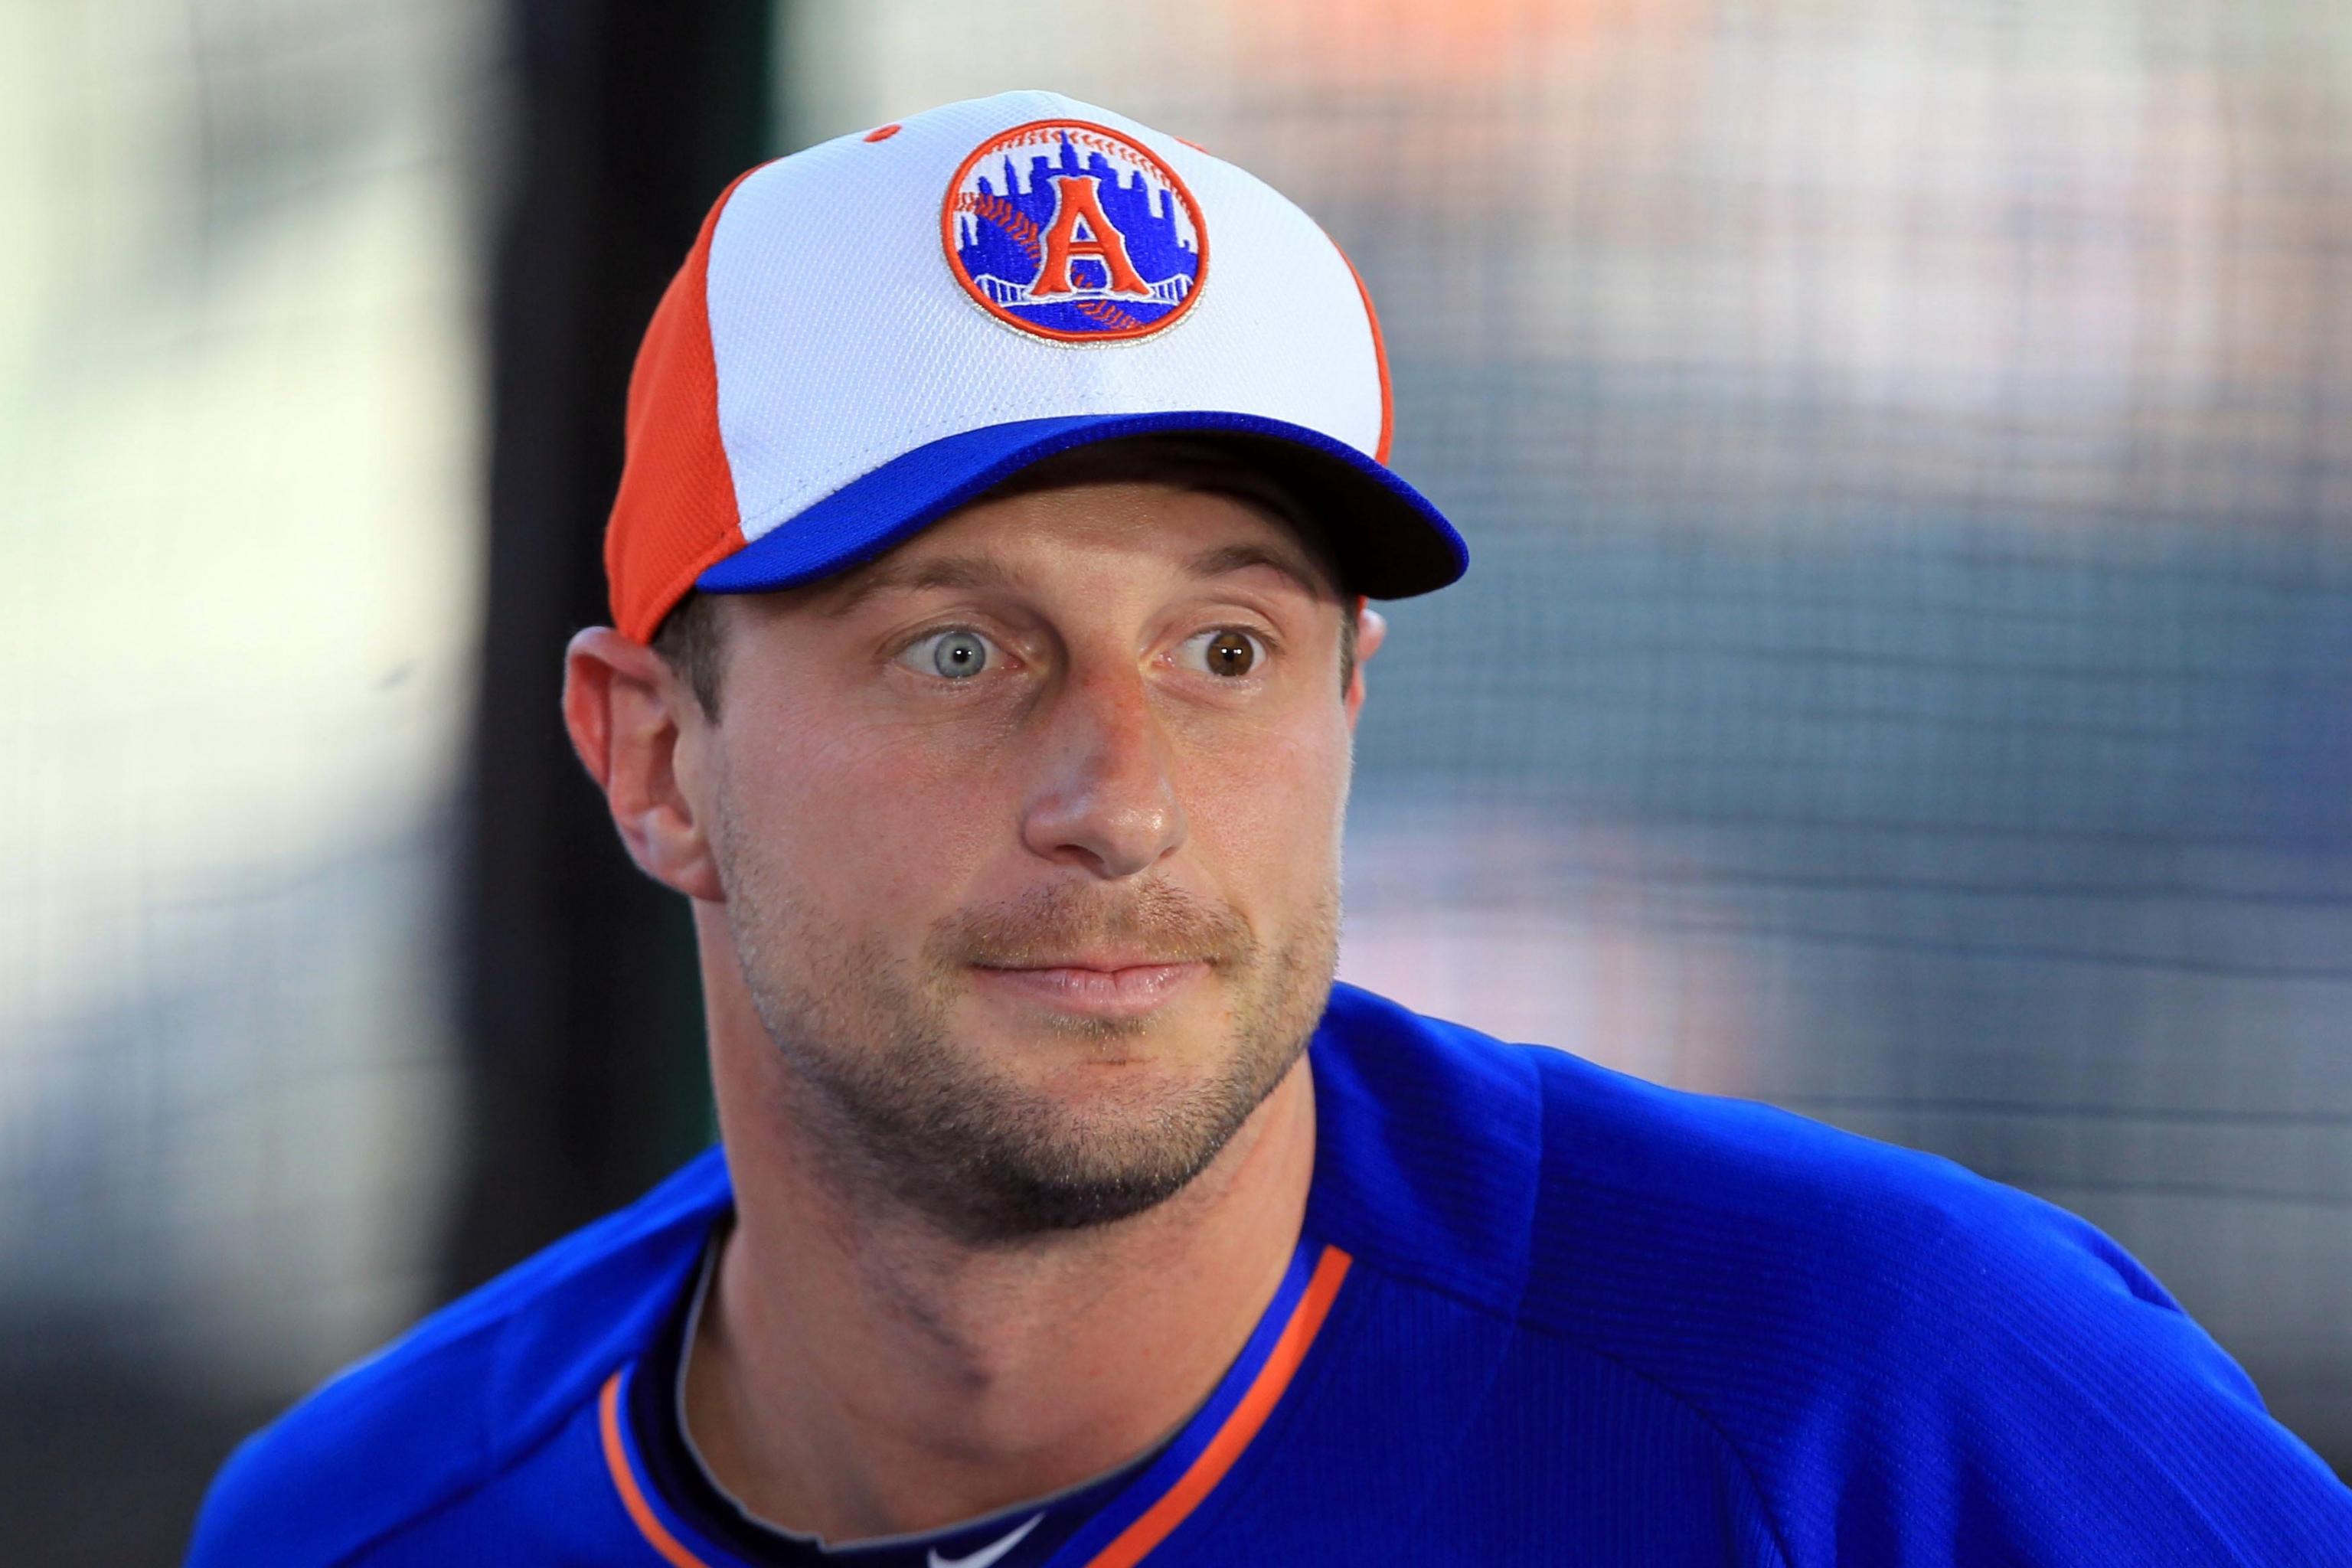 Yes, Max Scherzer Has 2 Different Colored Eyes in Case You Were